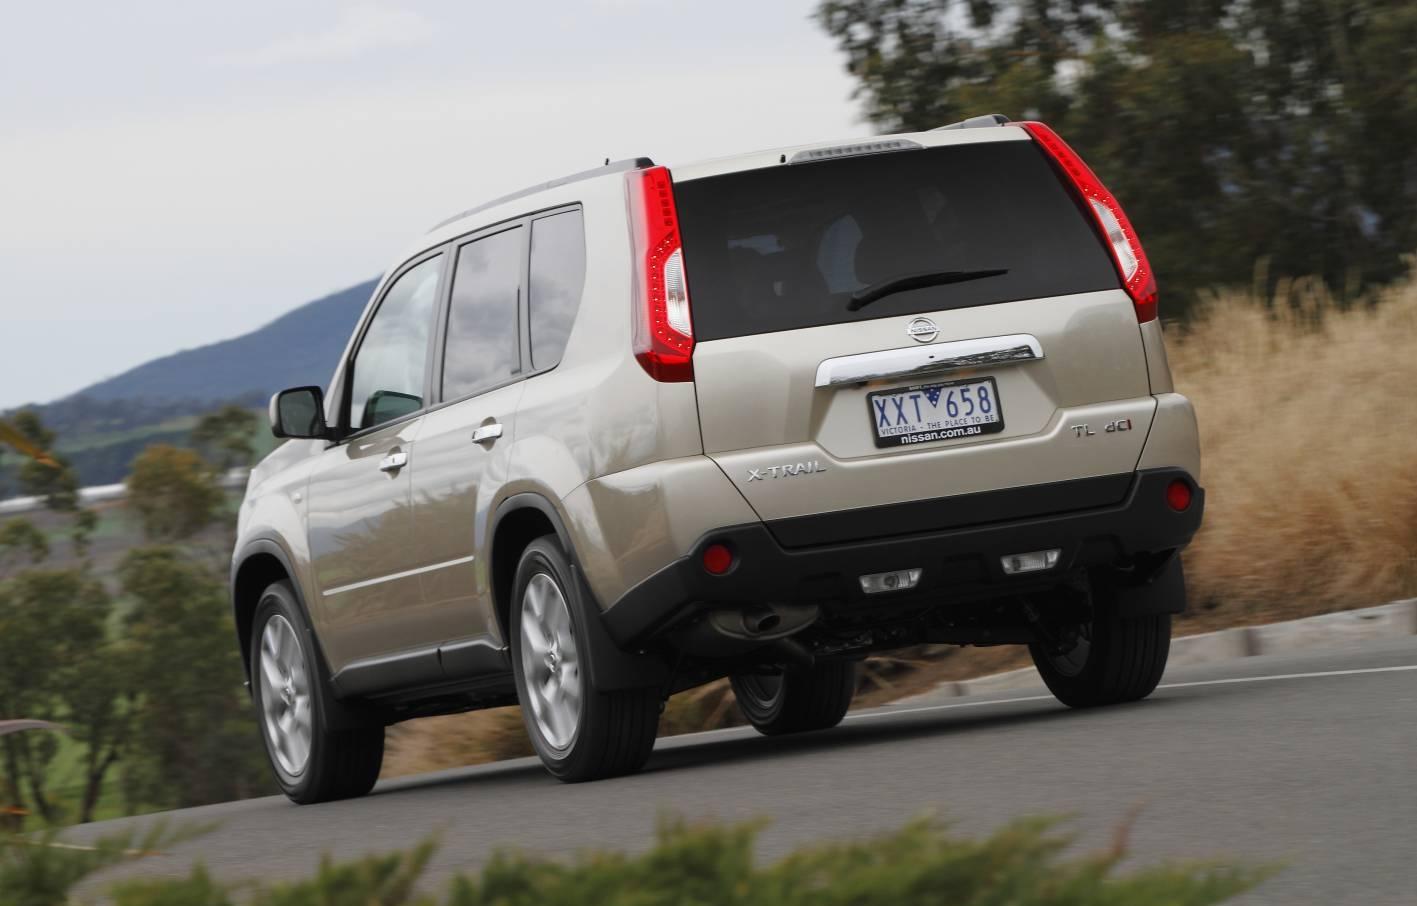 Nissan X-Trail-i 25 CVT 4 roues MOTRICES